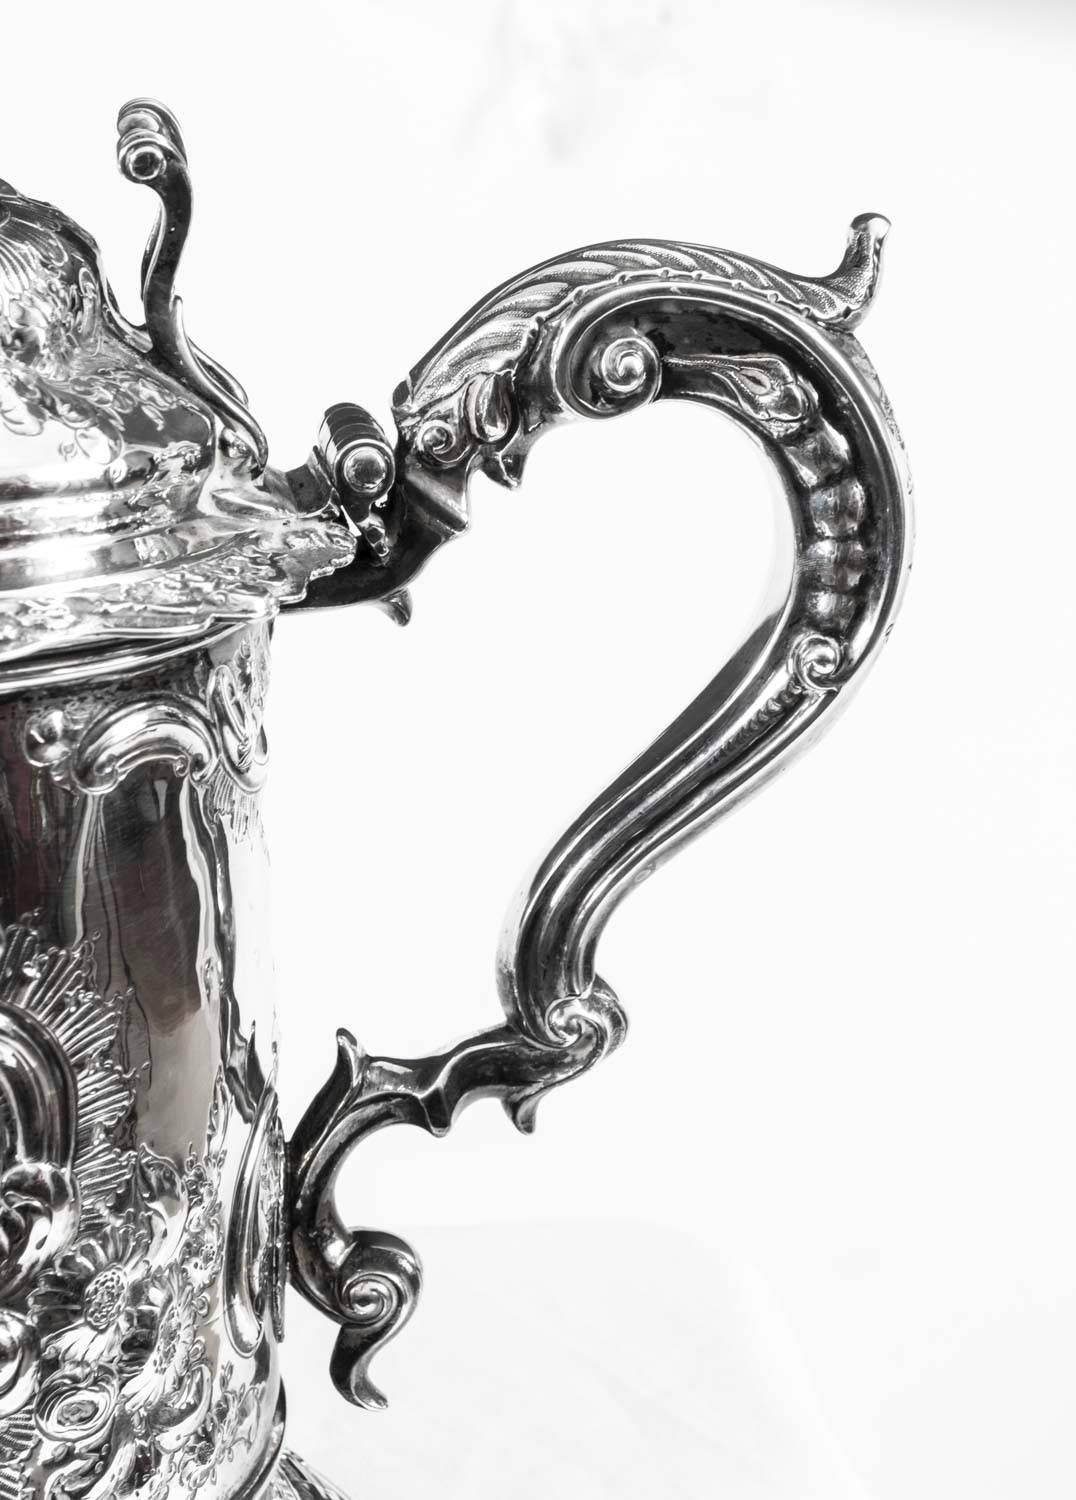 This is a wonderful huge antique English George III sterling silver tankard with spout, which bears hallmarks for London 1810 and the makers mark of Joseph Smith. 

It has wonderful embossed decoration, the work of a master silversmith, and has an